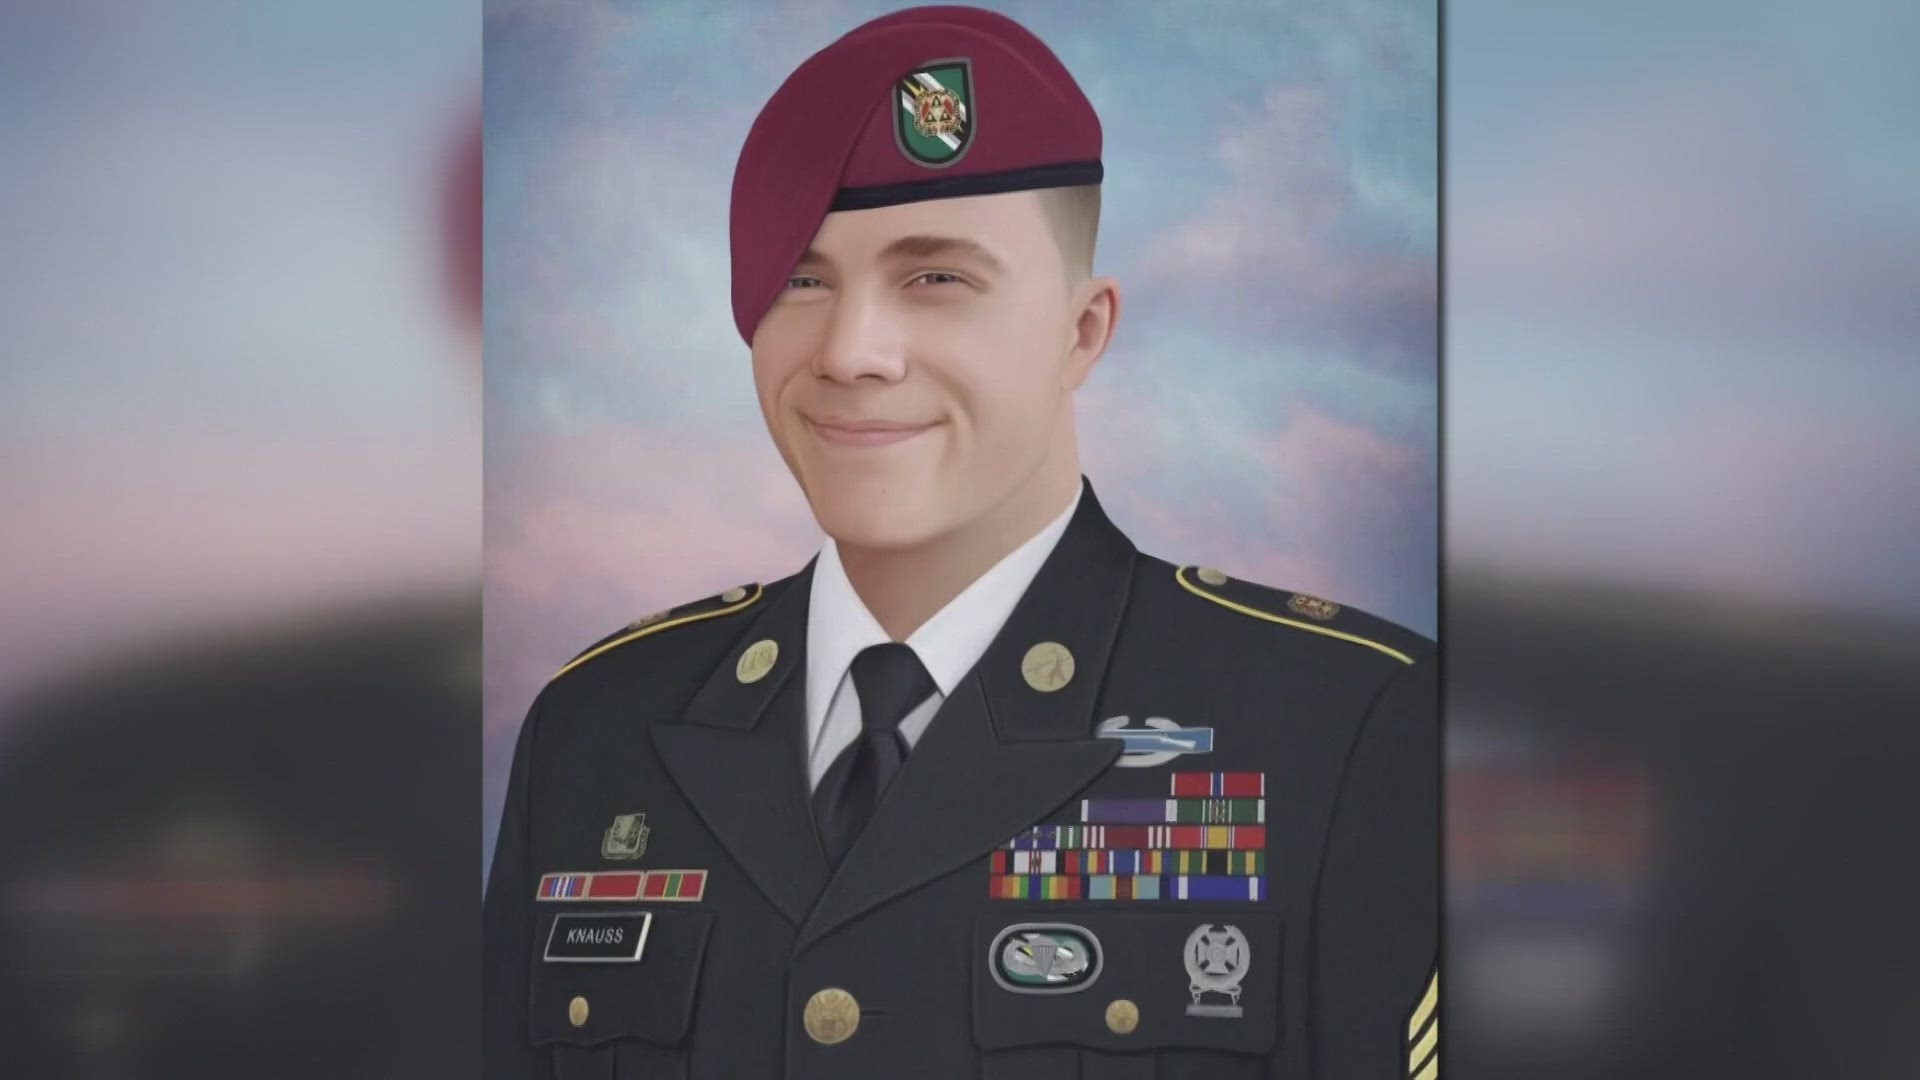 A new scholarship bears the name of a native son from East Tennessee, the last soldier killed in America’s longest war.